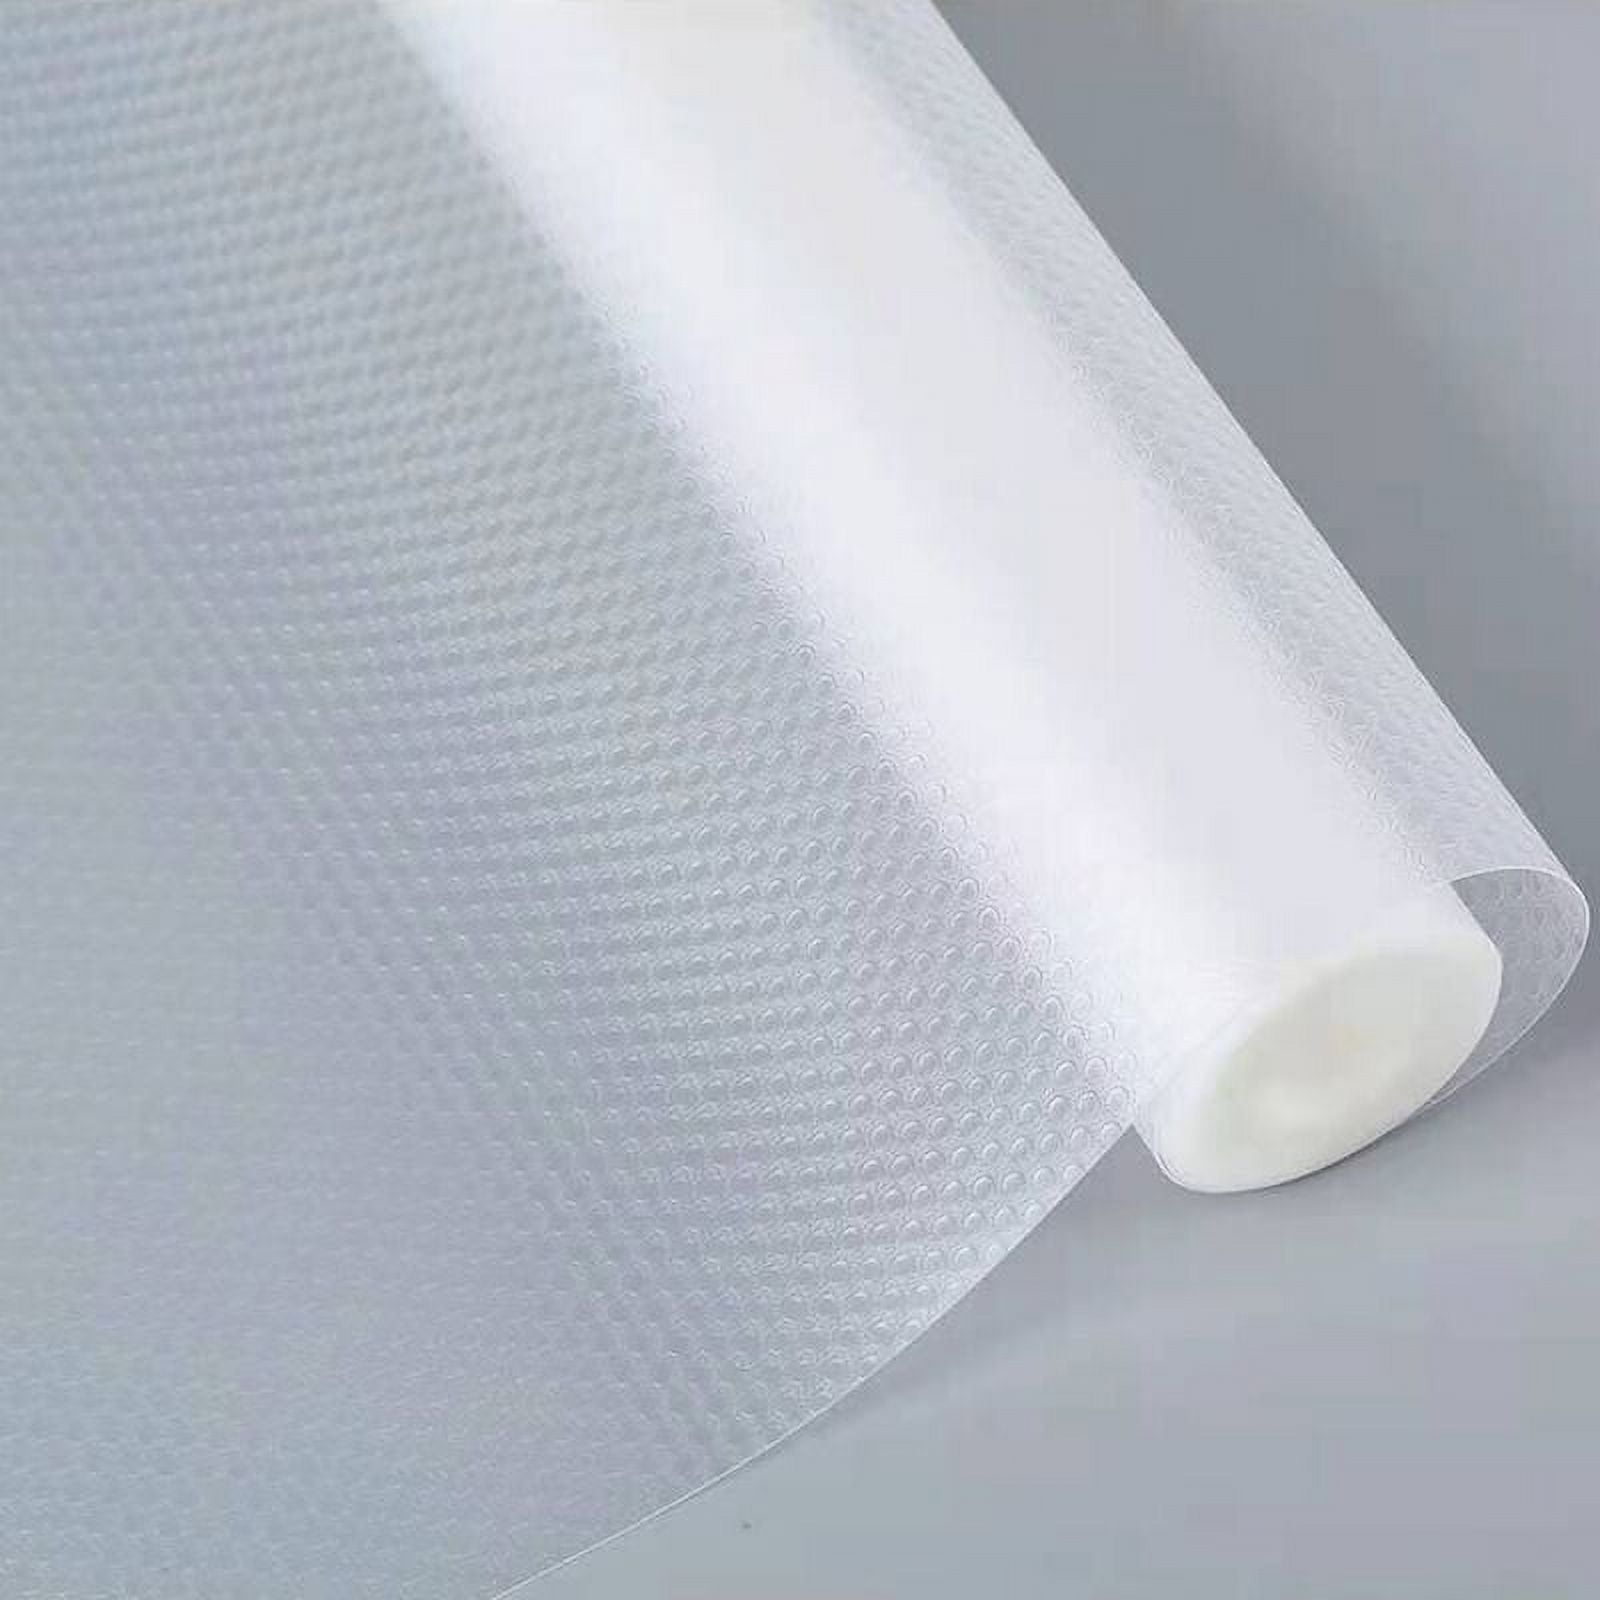 Shelf Liner White, Easy to Cut Kitchen Drawer Liner Roll, Non-Slip,  Waterproof, (10 x 30FT) PABUSIOR Cabinet Pantry Shelves Liners